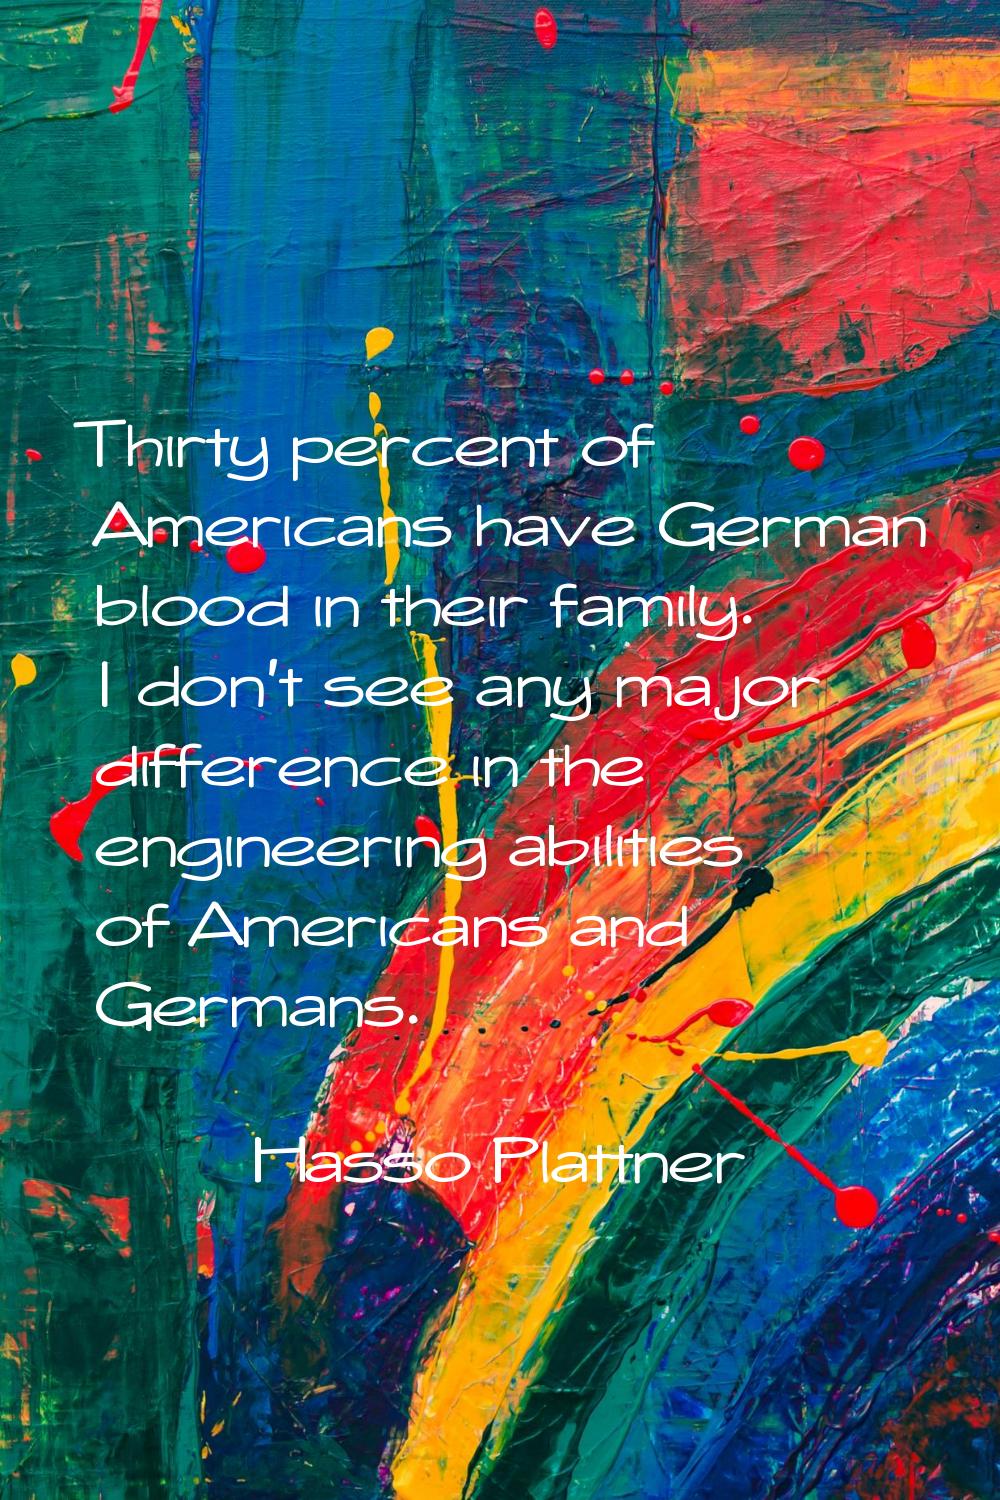 Thirty percent of Americans have German blood in their family. I don't see any major difference in 